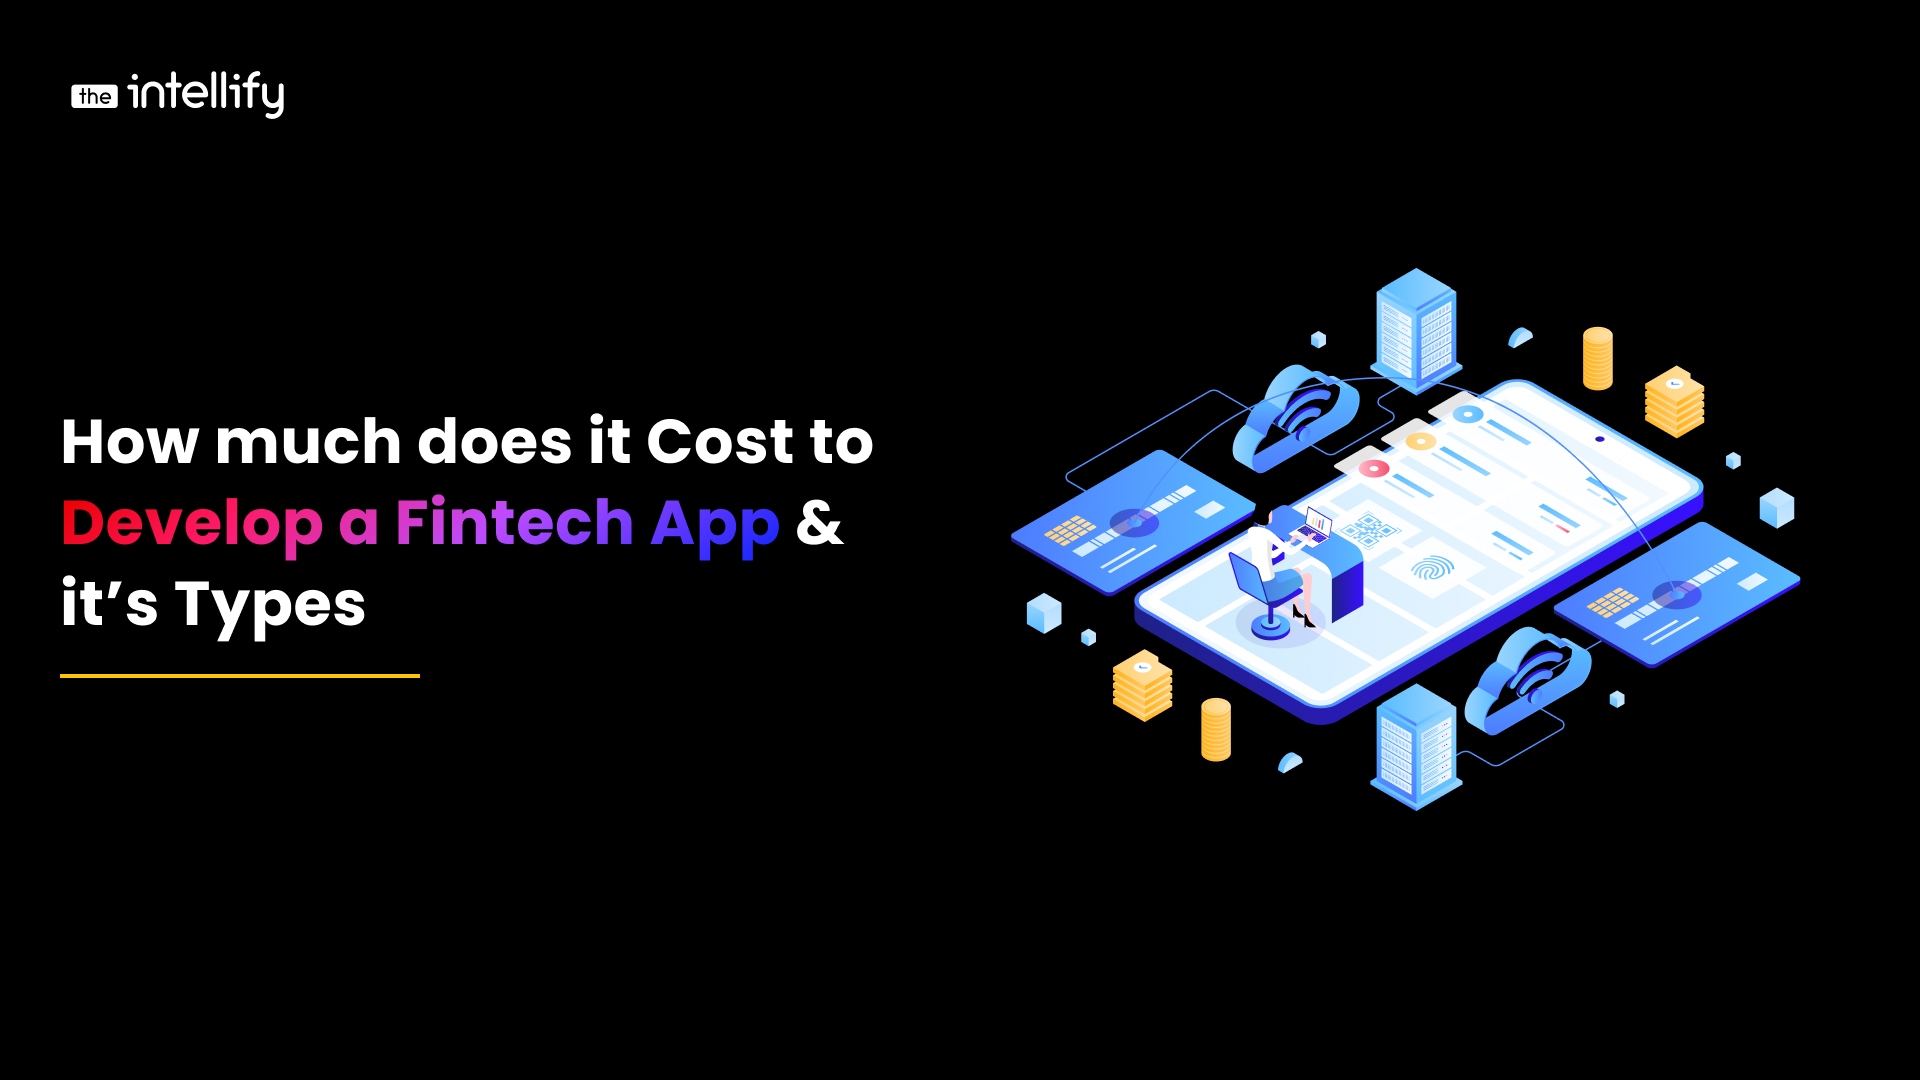 How much does it Cost to Develop a Fintech App & it’s Types